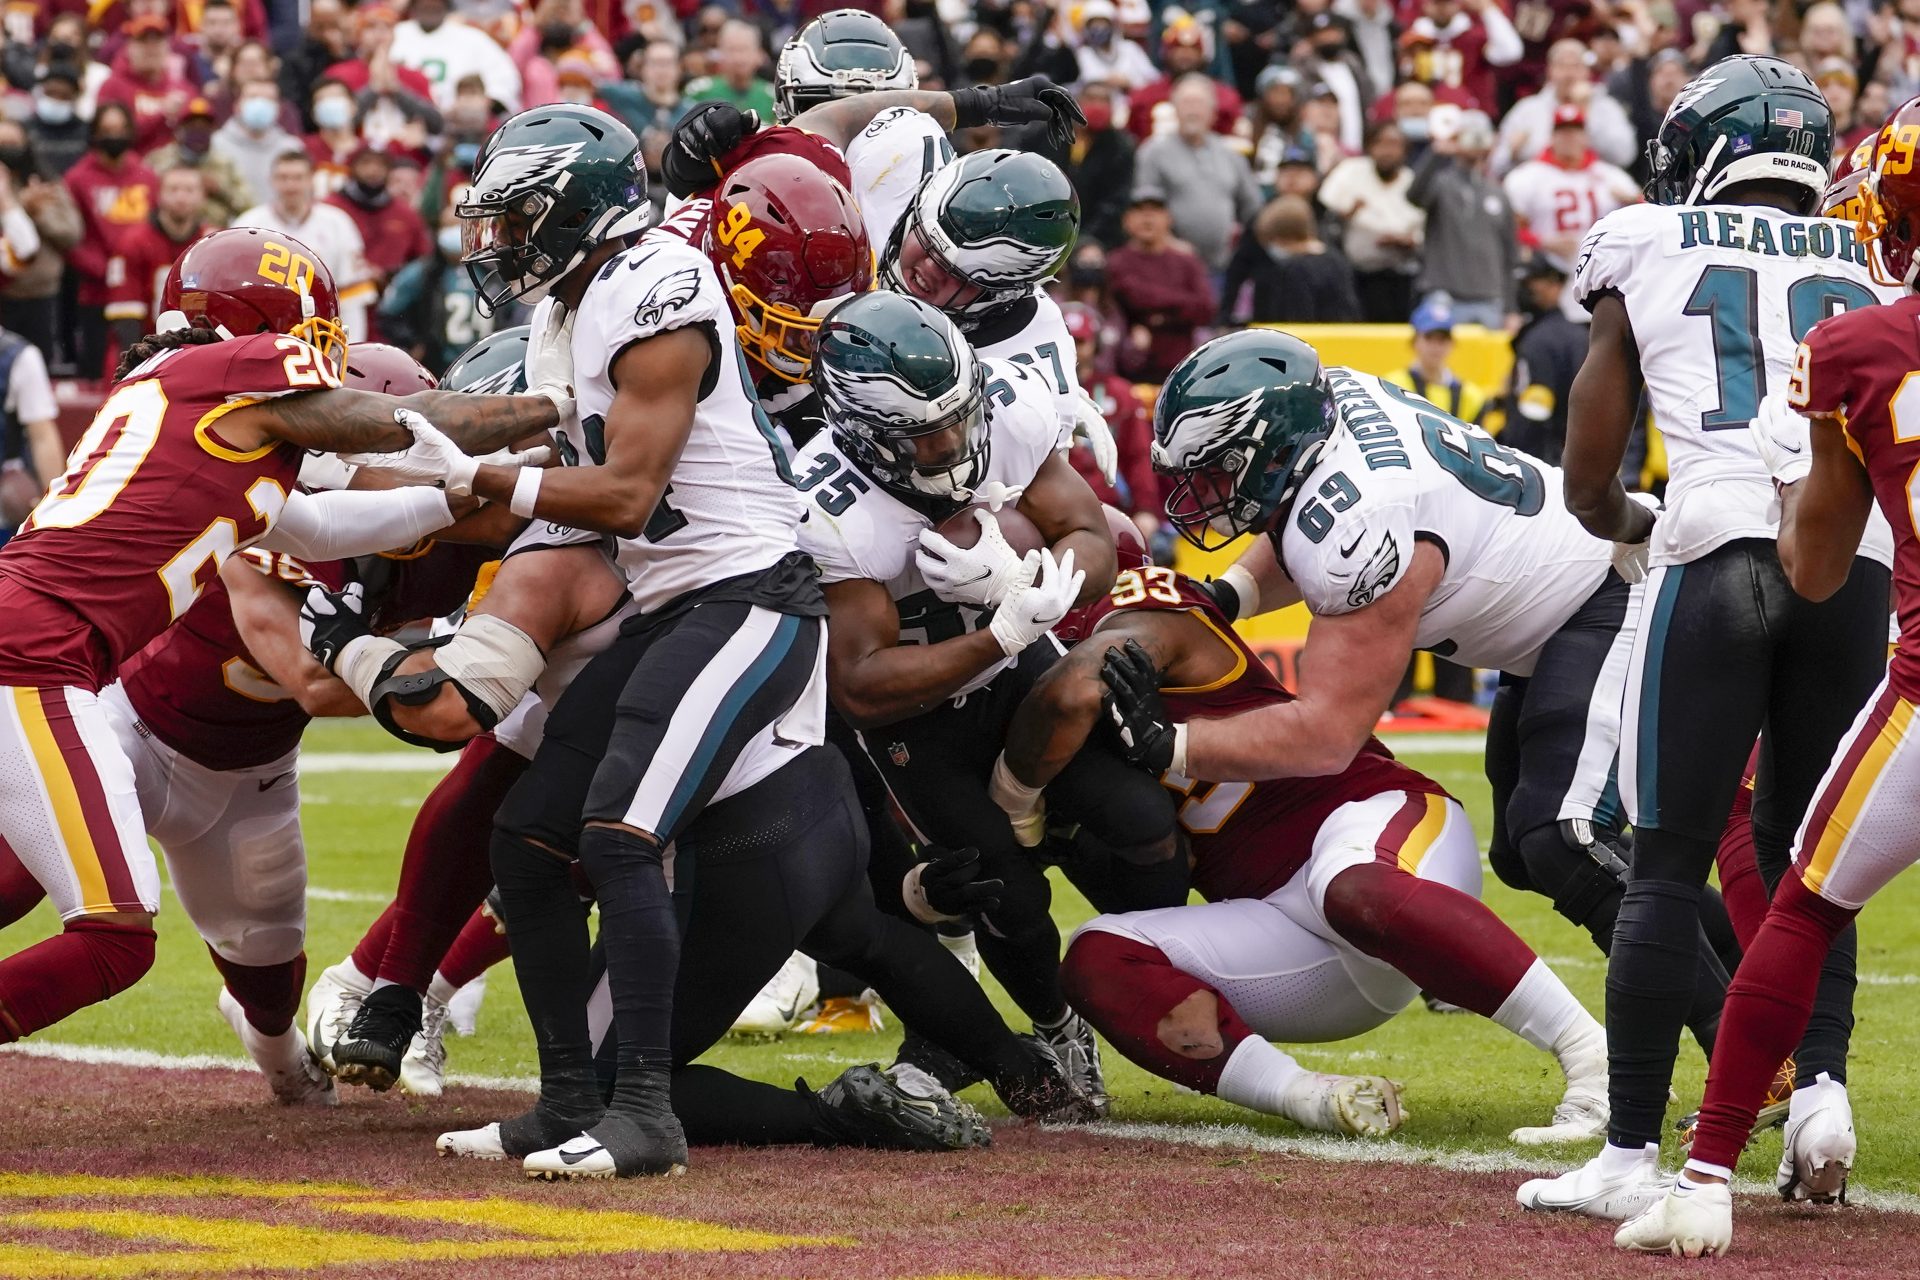 Philadelphia Eagles running back Boston Scott (35) scores a touchdown against the Washington Football Team during the first half of an NFL football game, Sunday, Jan. 2, 2022, in Landover, Md.